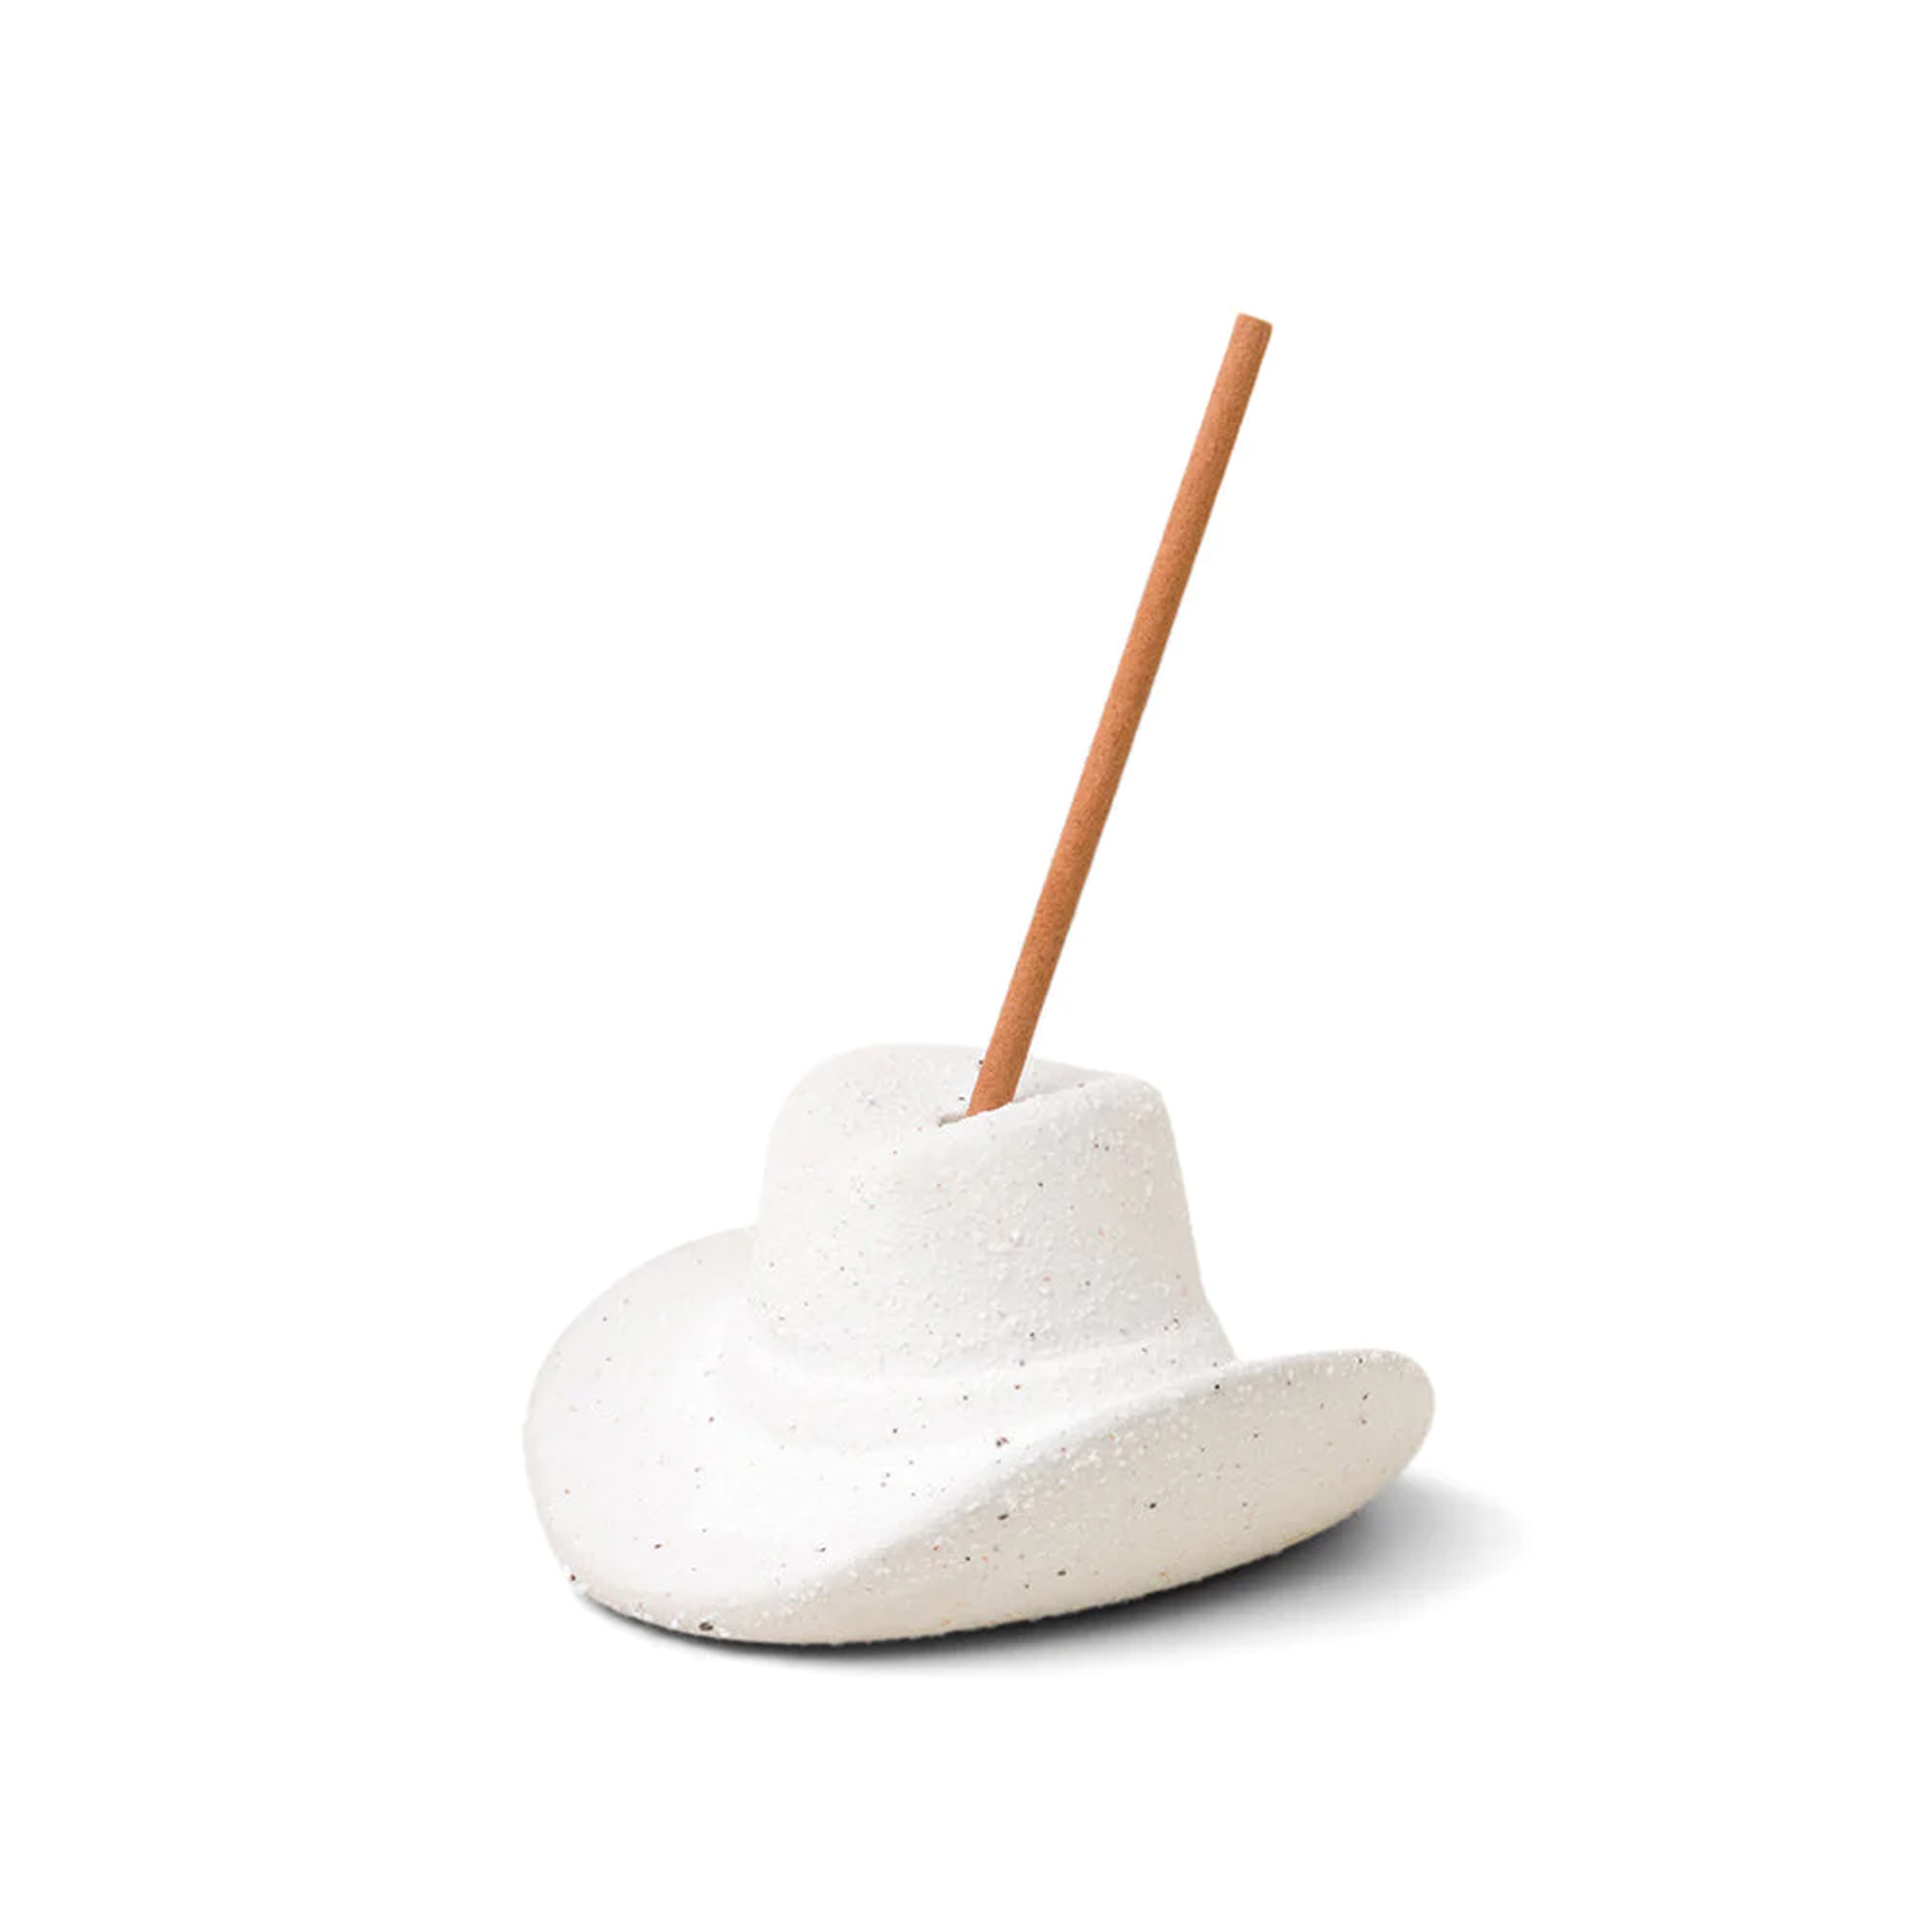 Paddy Wax Cowboy Hat Incense Holder - White